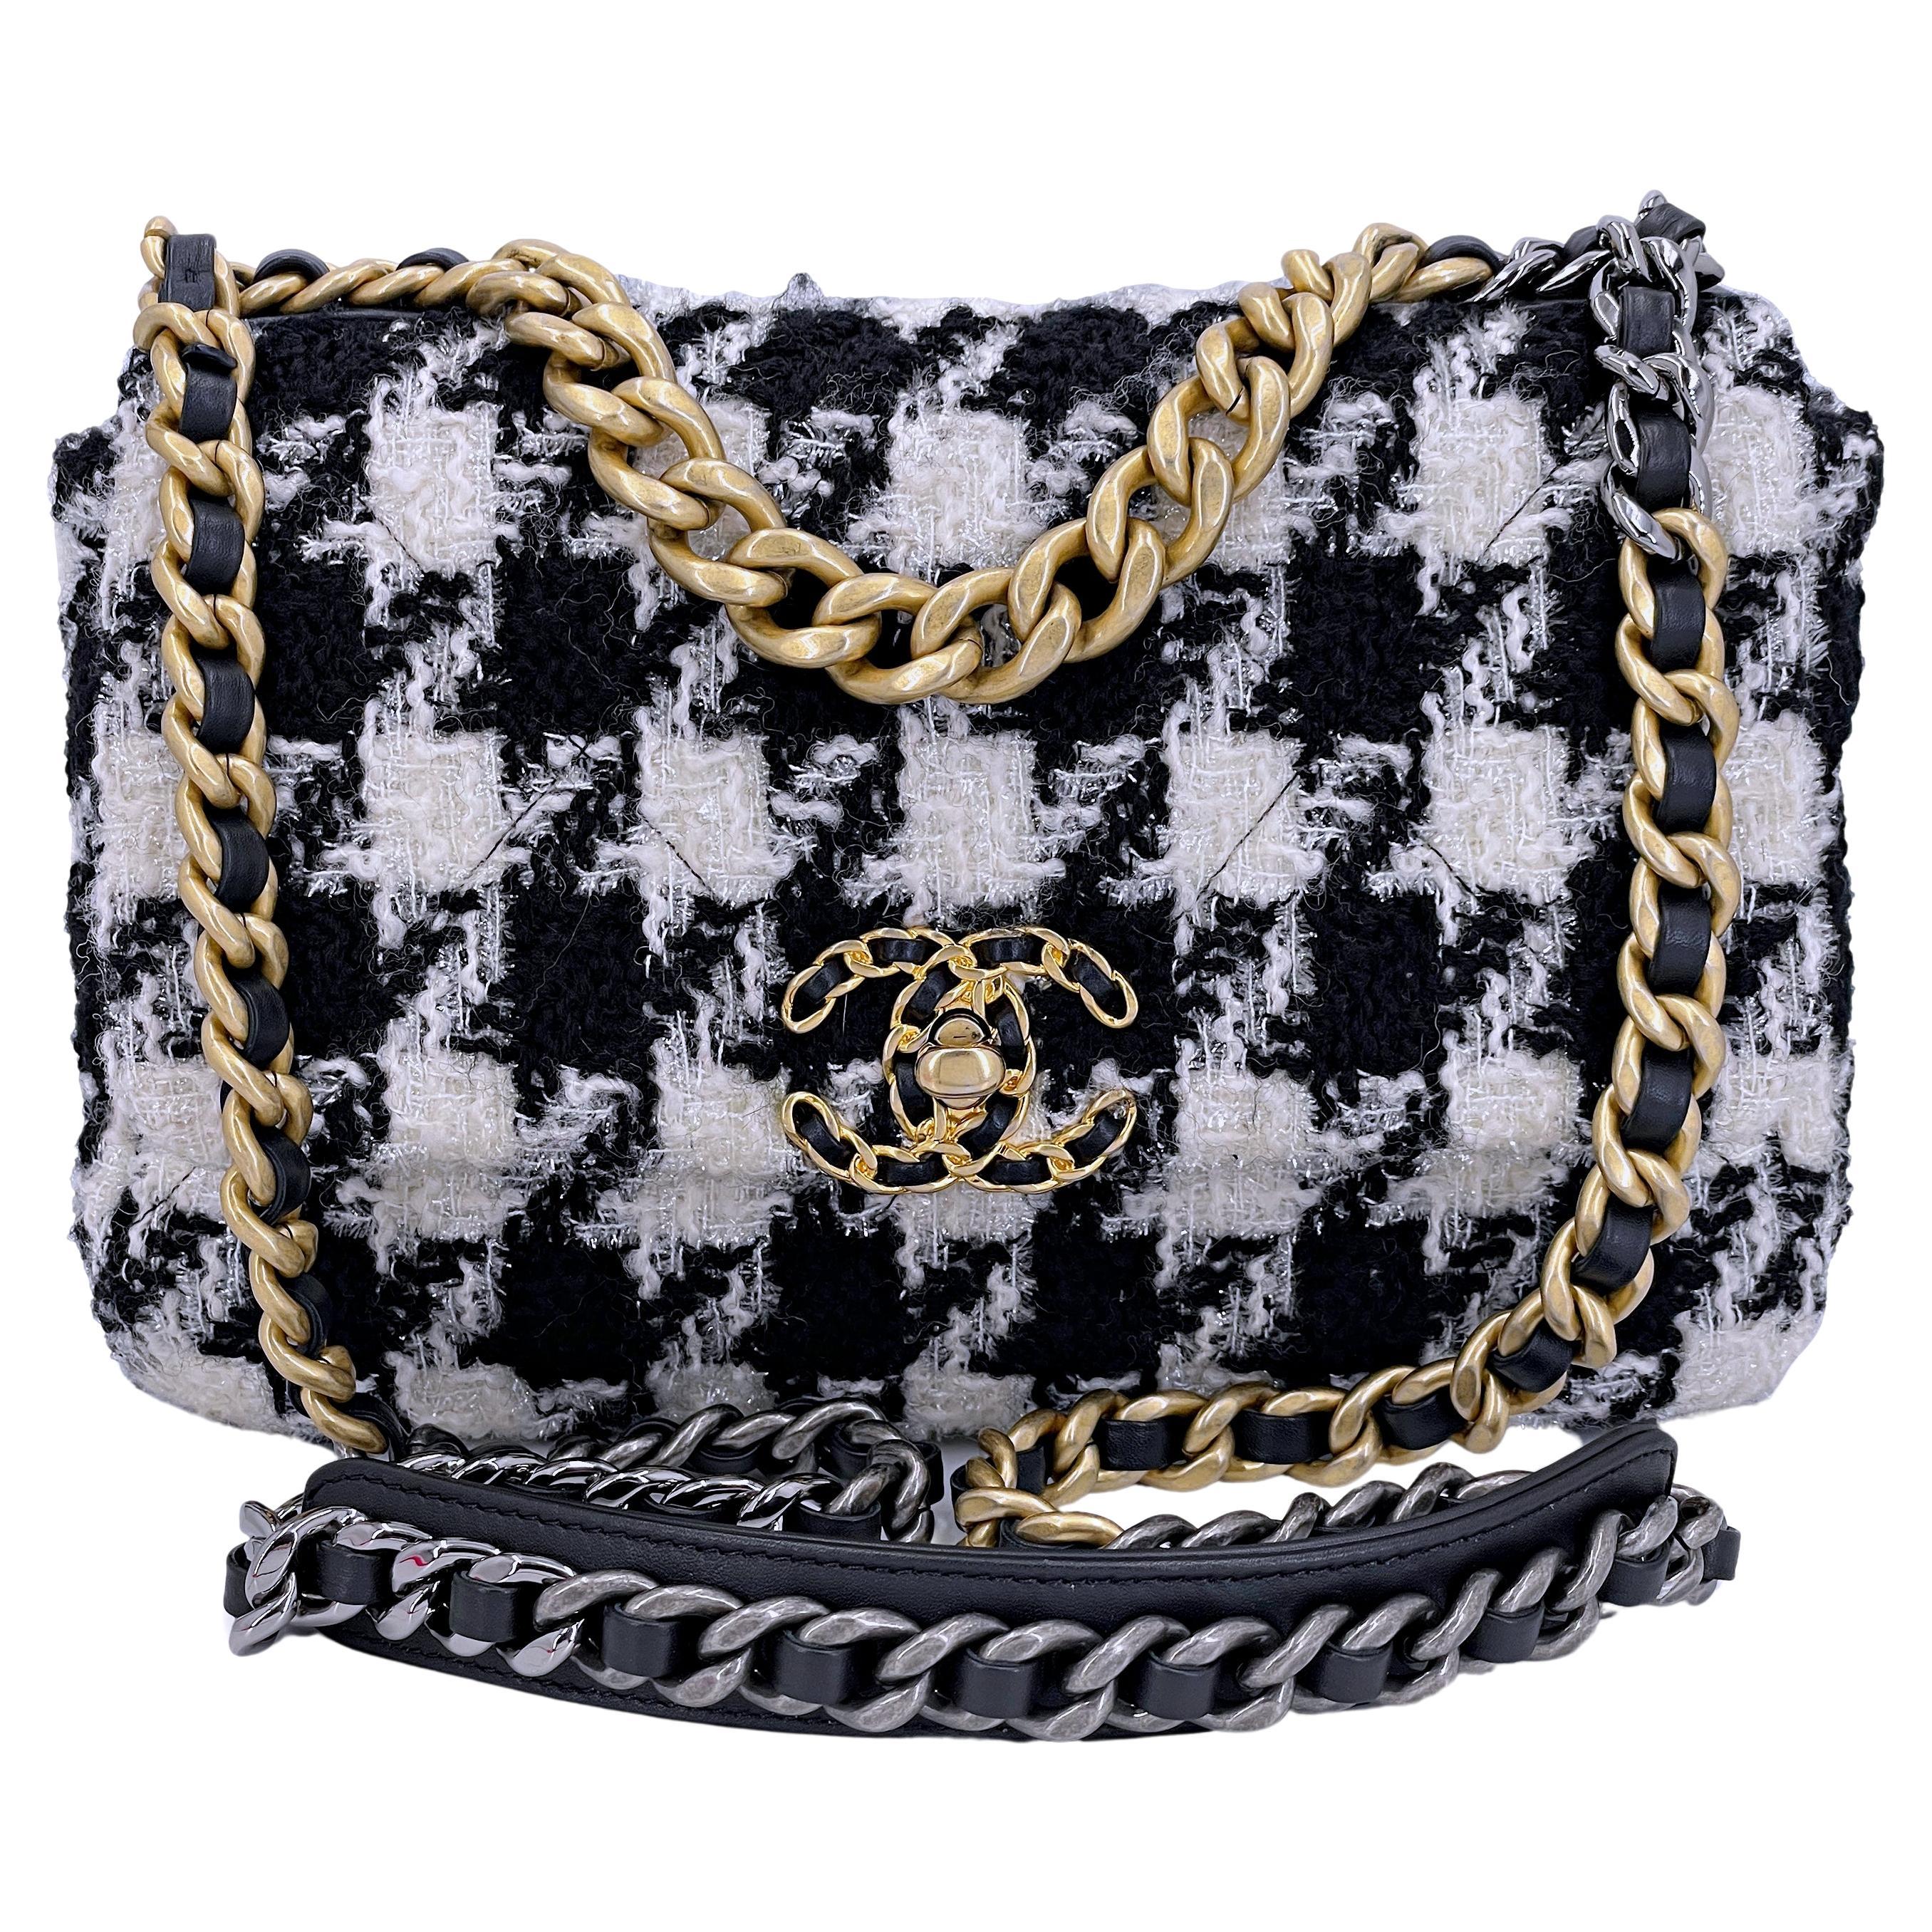 Chanel 19 Small Medium Houndstooth Tweed Flap Bag 67226 For